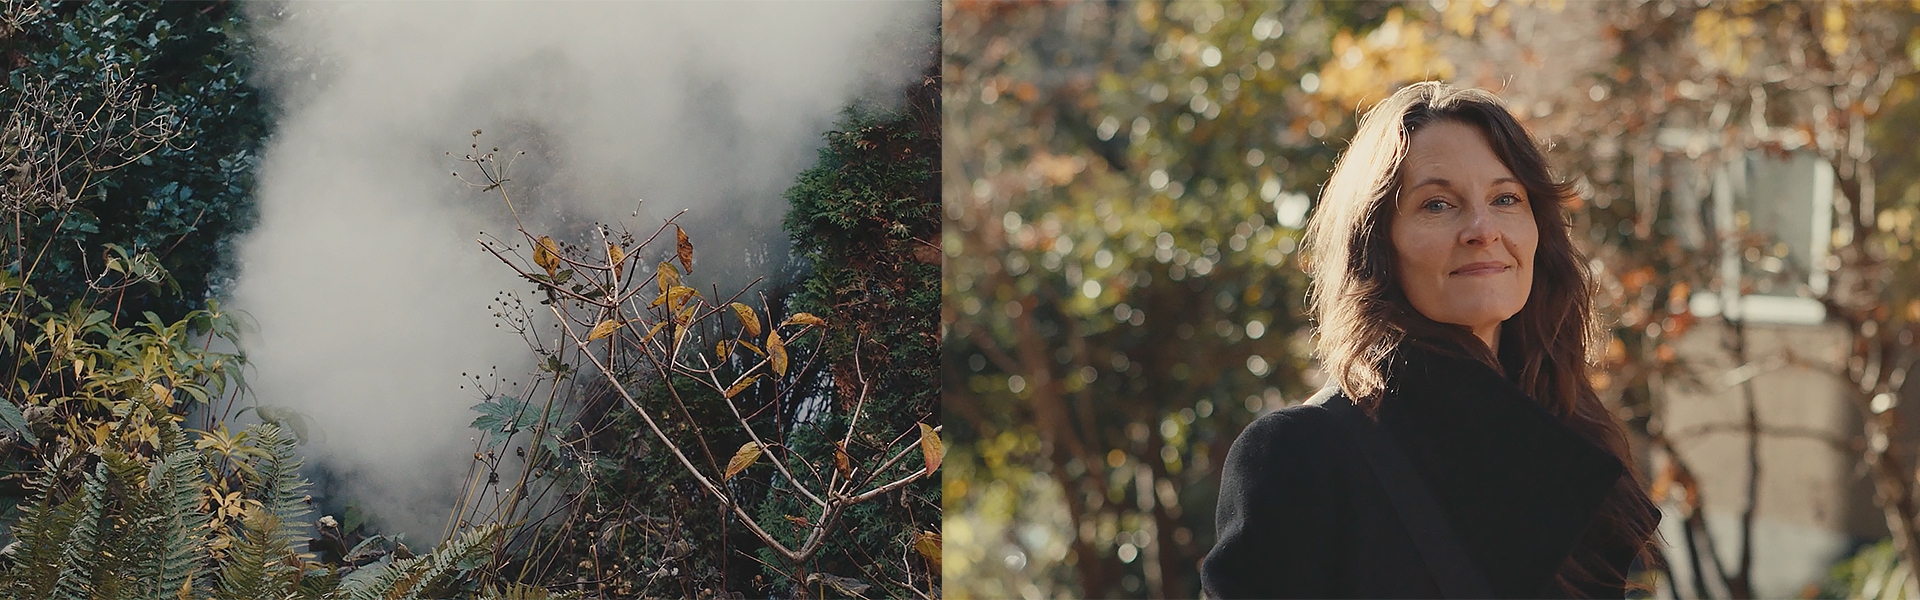 At left, a still image shows smoke rising from brush. At right, a casual portrait of Shannon Walsh outdoors.